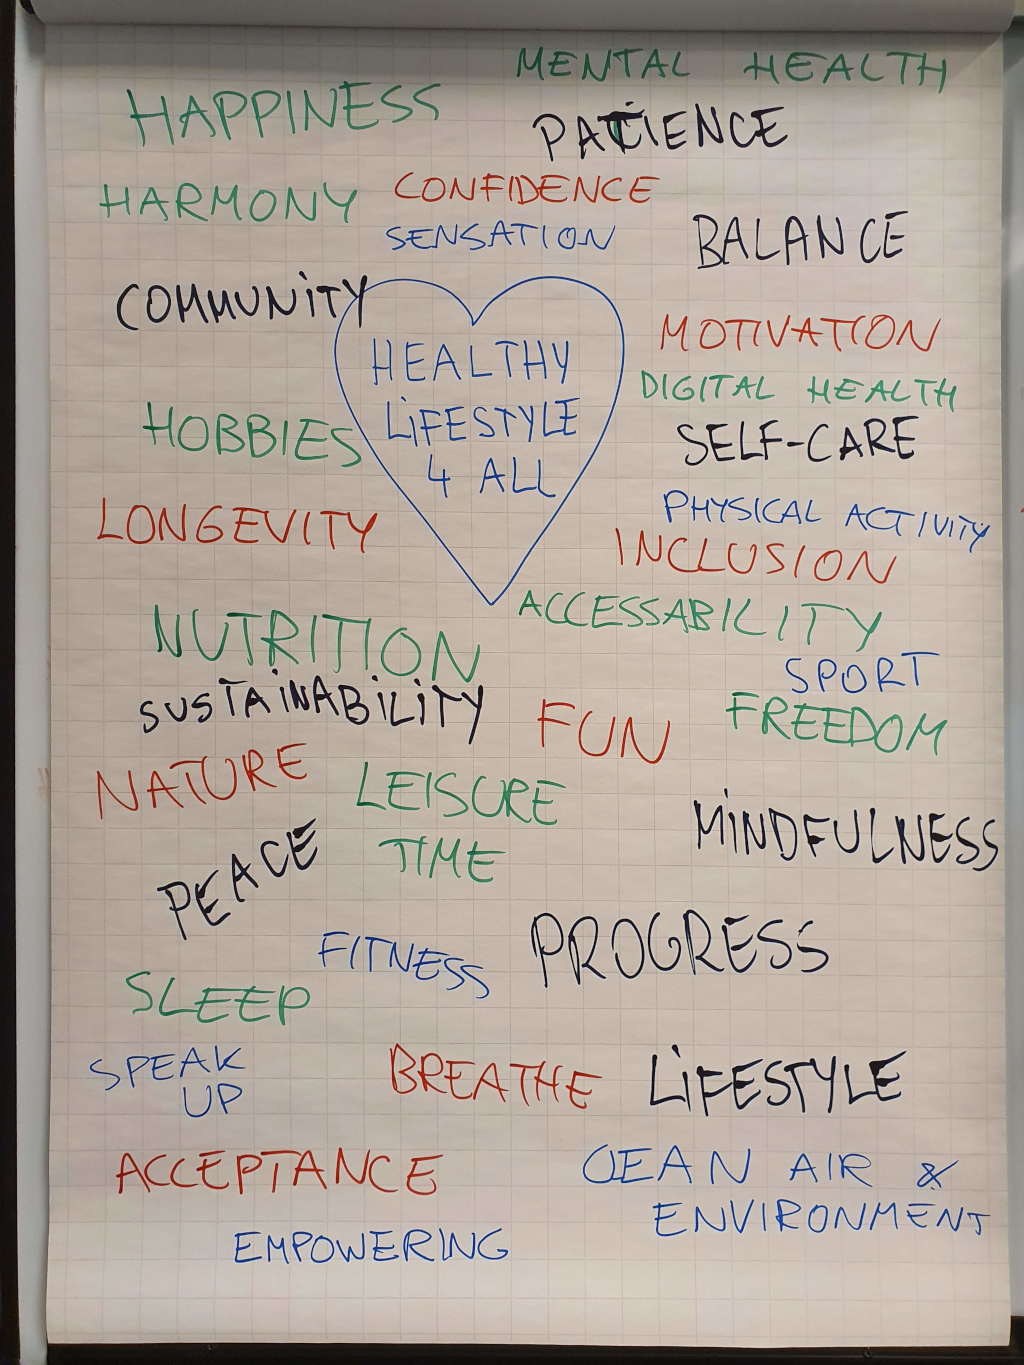 Mindmap of the brainstorming session on Healthy Lifestyle 4 All